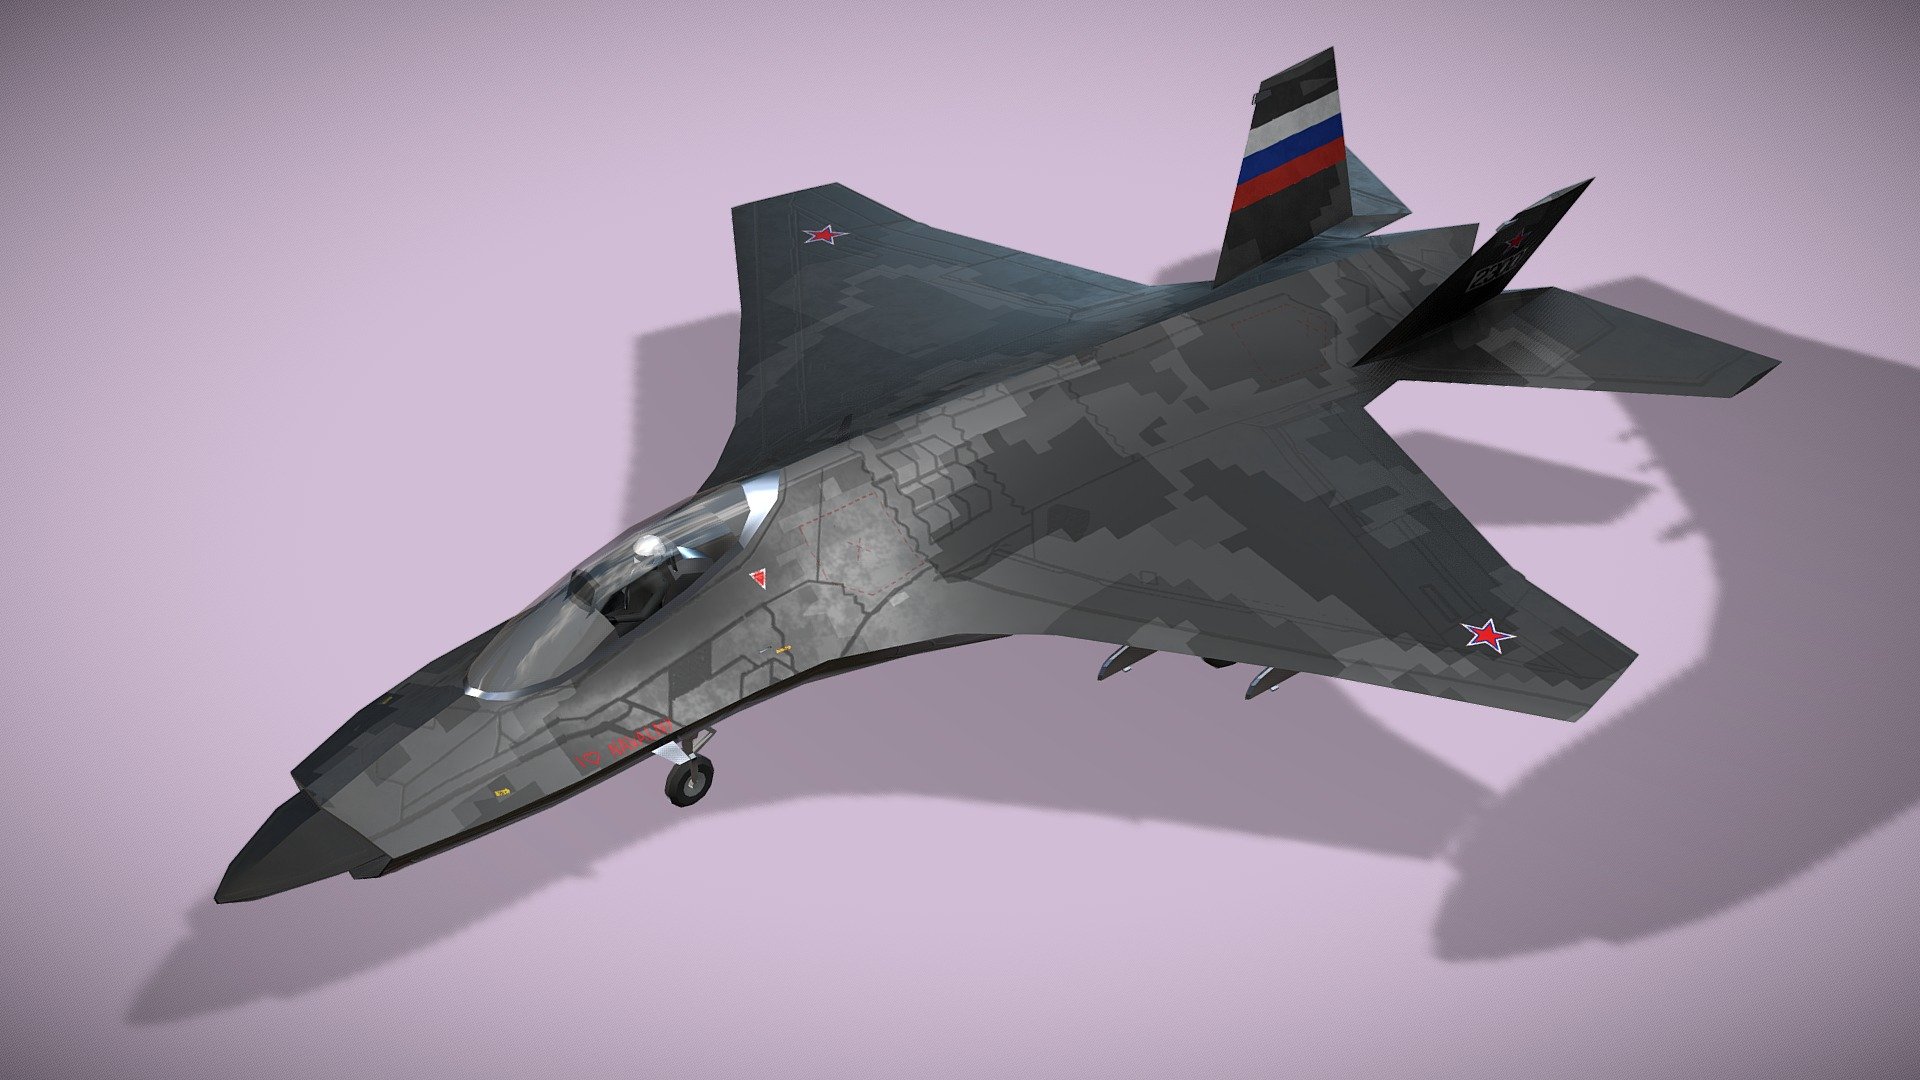 Mikoyan Gurevich MIG-41 PAK DP

Lowpoly model of russian jet interceptor



MiG-41 is a concept project of a Russian heavy interceptor, long-range fighter, which is to replace the MiG-31 in the line. It suppose to reach supersonic speed without using afterburner and utilize stealth technology. The design of the aircraft is to enable it to achieve very high speeds, up to Mach 4.3 and high flight altitude. The machine also to have a large operating radius of 700 to 1500 km. It is planned to enter service from 2028. This is not confirmed concept. Original idea comes from Renderdock as far as i know.



1 standing version with wheels and 2 flying versions with trails, afterburner, pilot and armament.

Model has bump map, roughness map and 3 x diffuse textures.



Check also my other aircrafts and cars 3d model